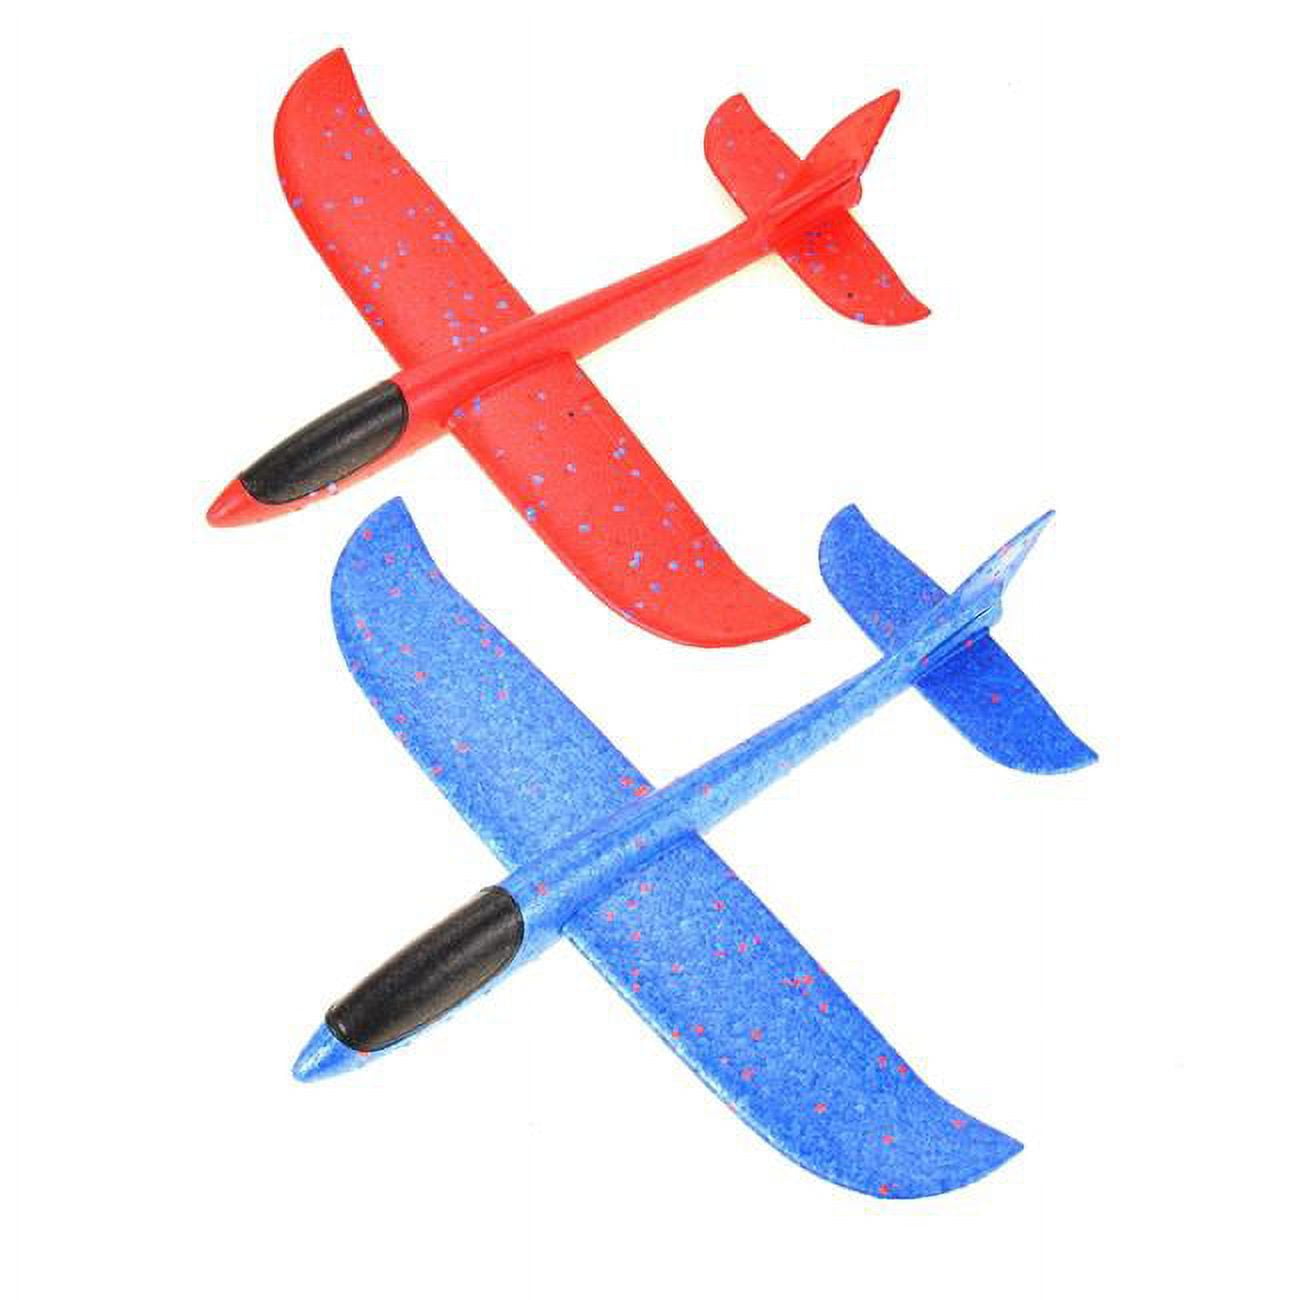 Picture of AZ Trading PS1349 Toy Foam Throwing Airplane - Pack of 2